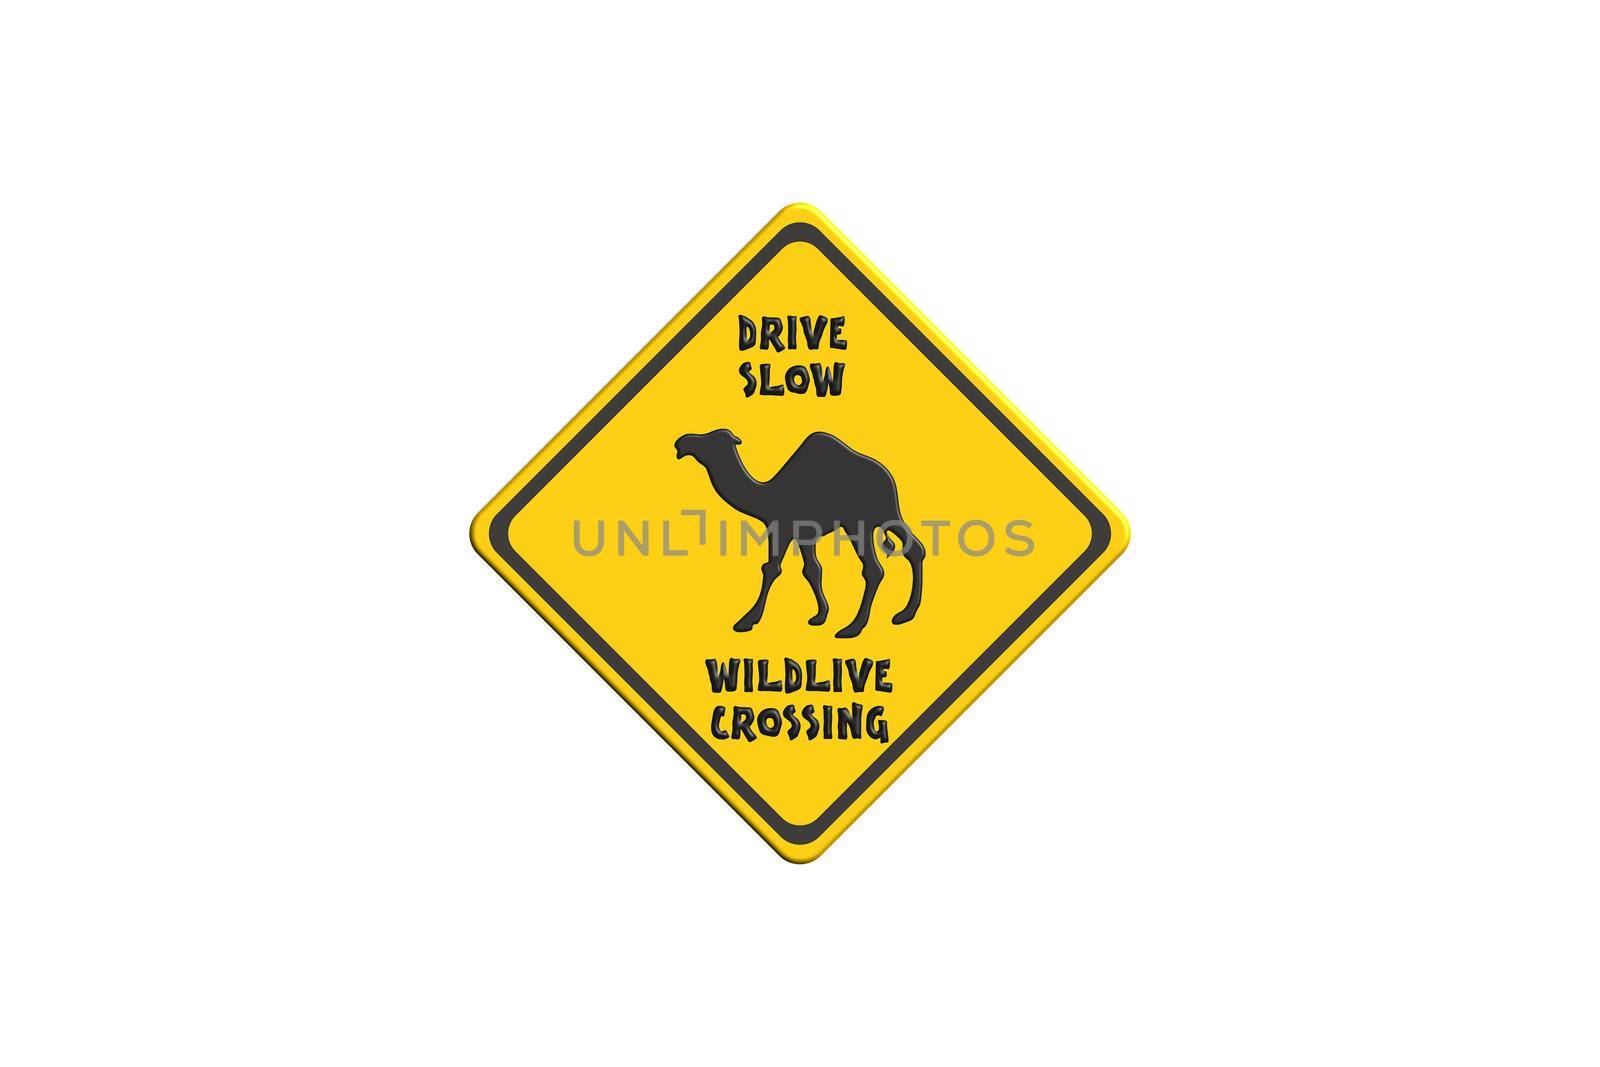 Camel warning sign                                  by JFsPic